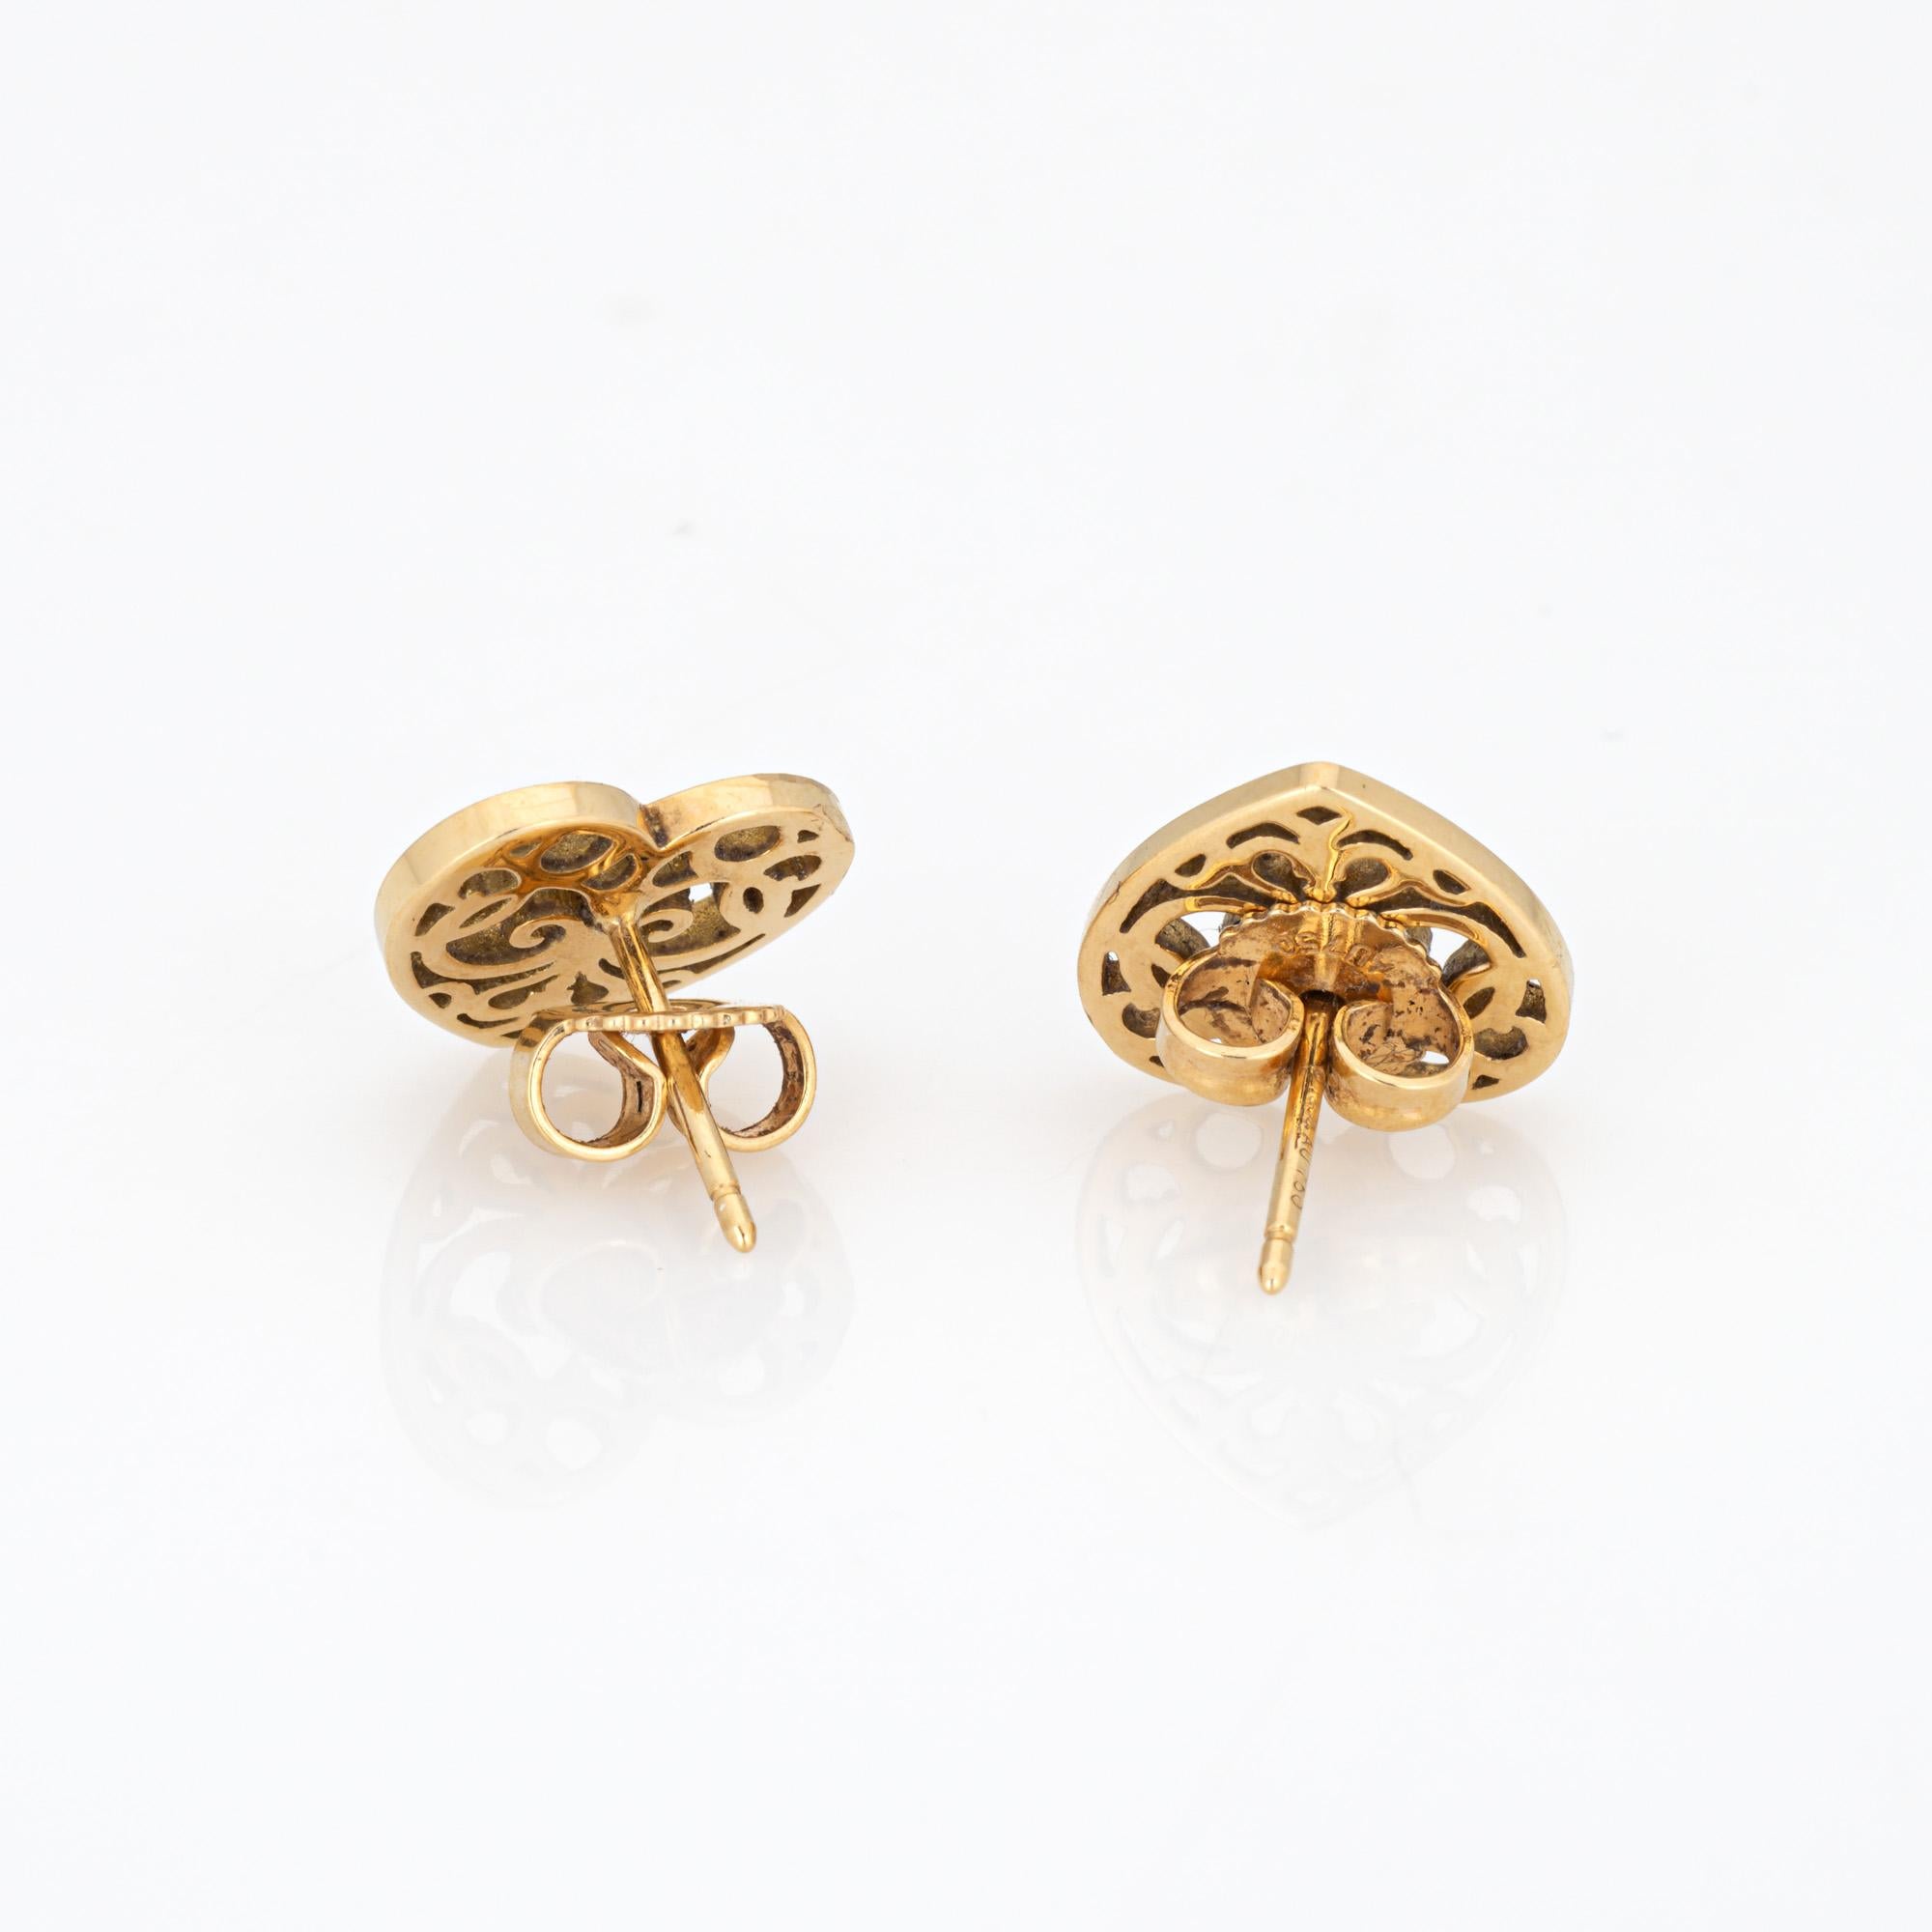 Finely detailed pair of pre-owned Tiffany & Co 'Enchant' earrings crafted in 18k yellow gold (circa 1993).

From the Tiffany & Co 'Enchant' collection launched in 2012, the earrings were inspired by scrolled iron gates of opulent estates and secret